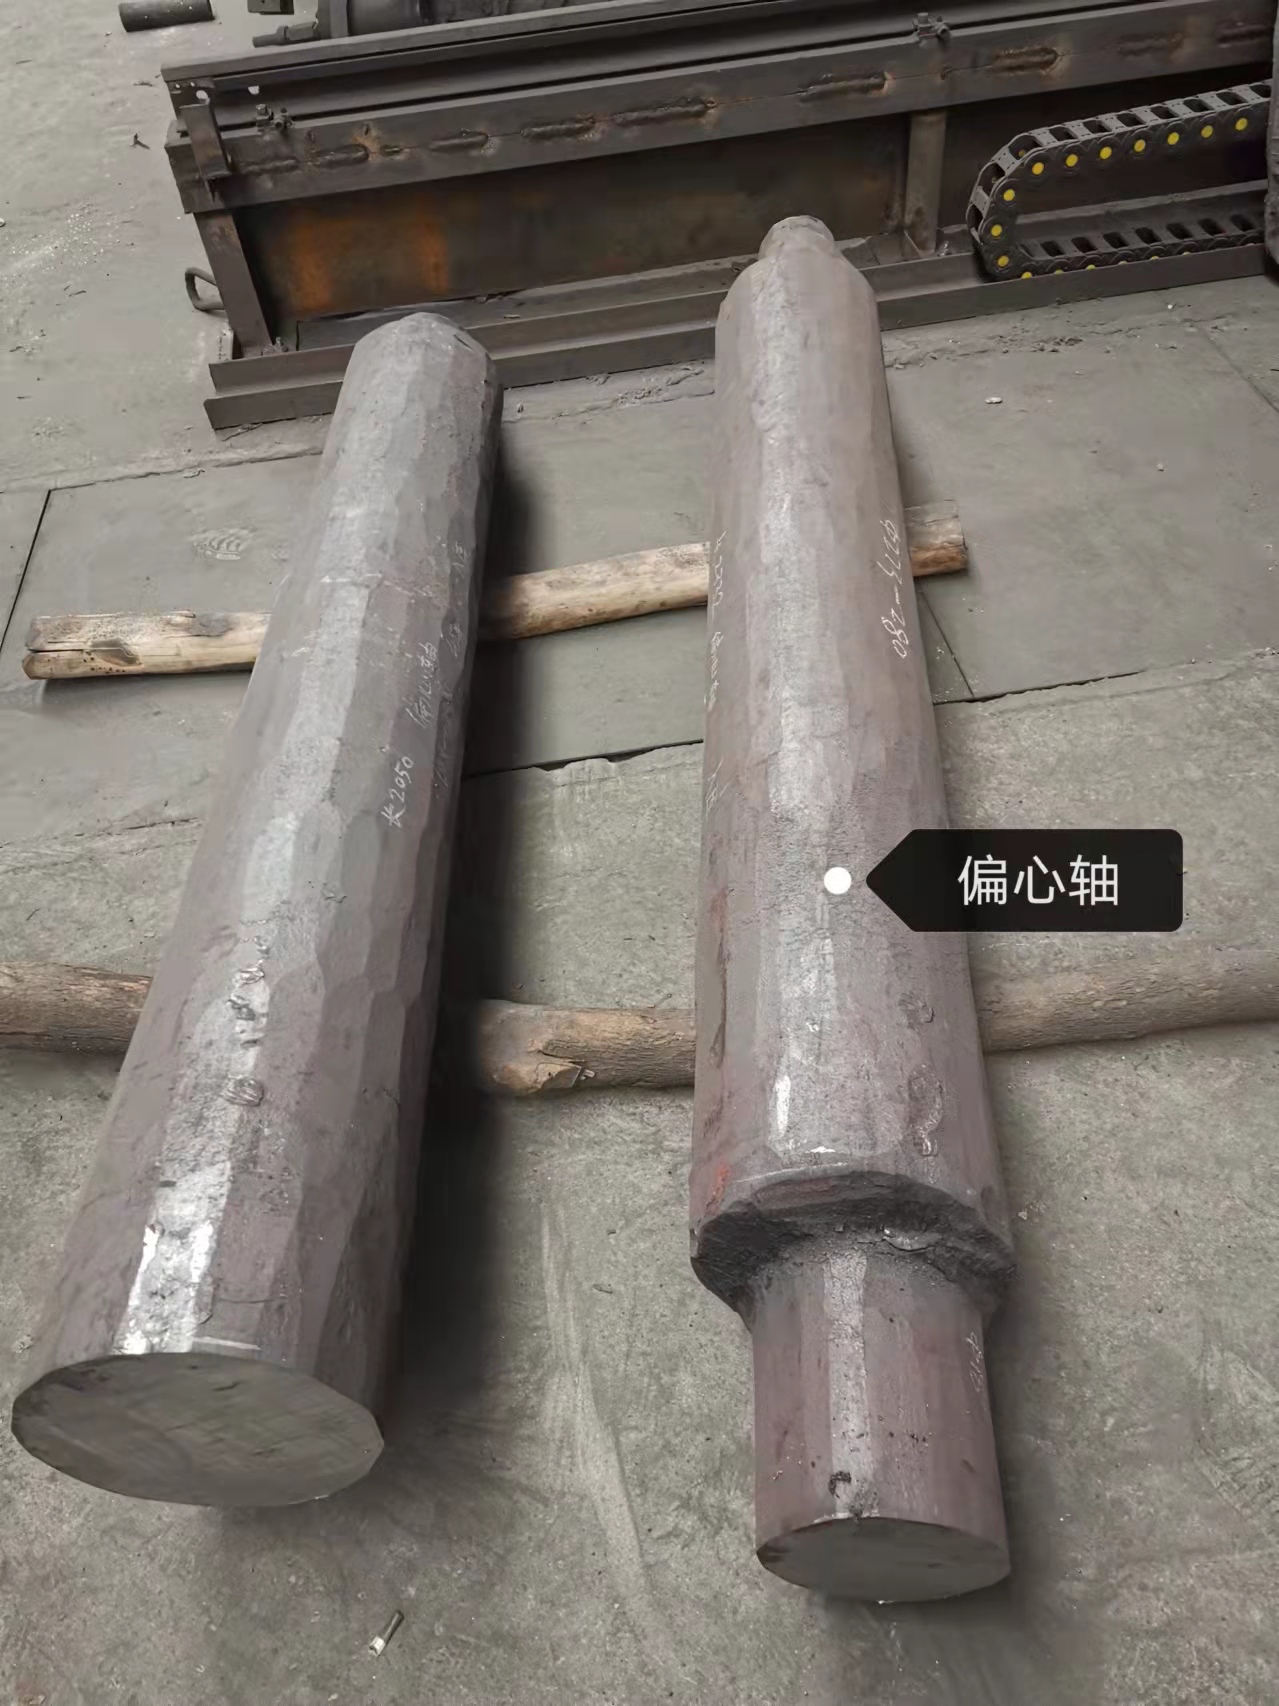 How should the blank forging of piston rod be selected